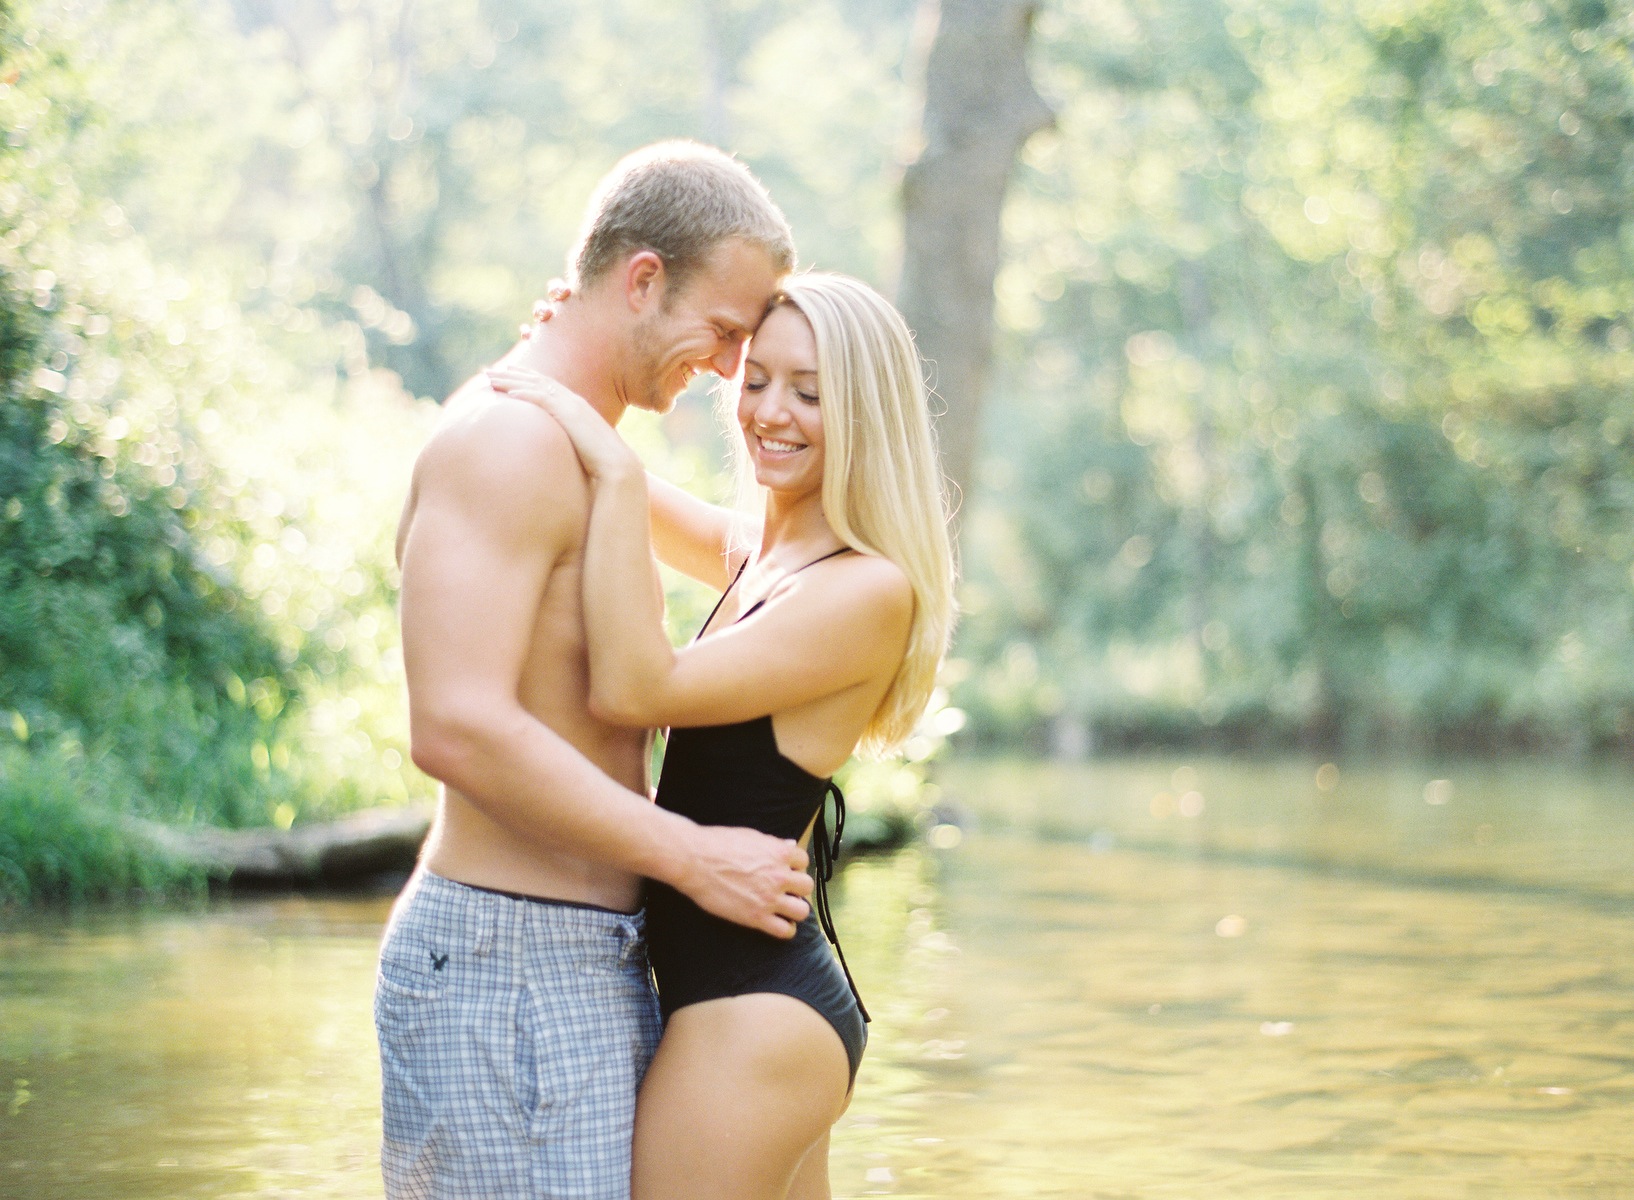 vermont swimming hole engagement photos by gabe aceves